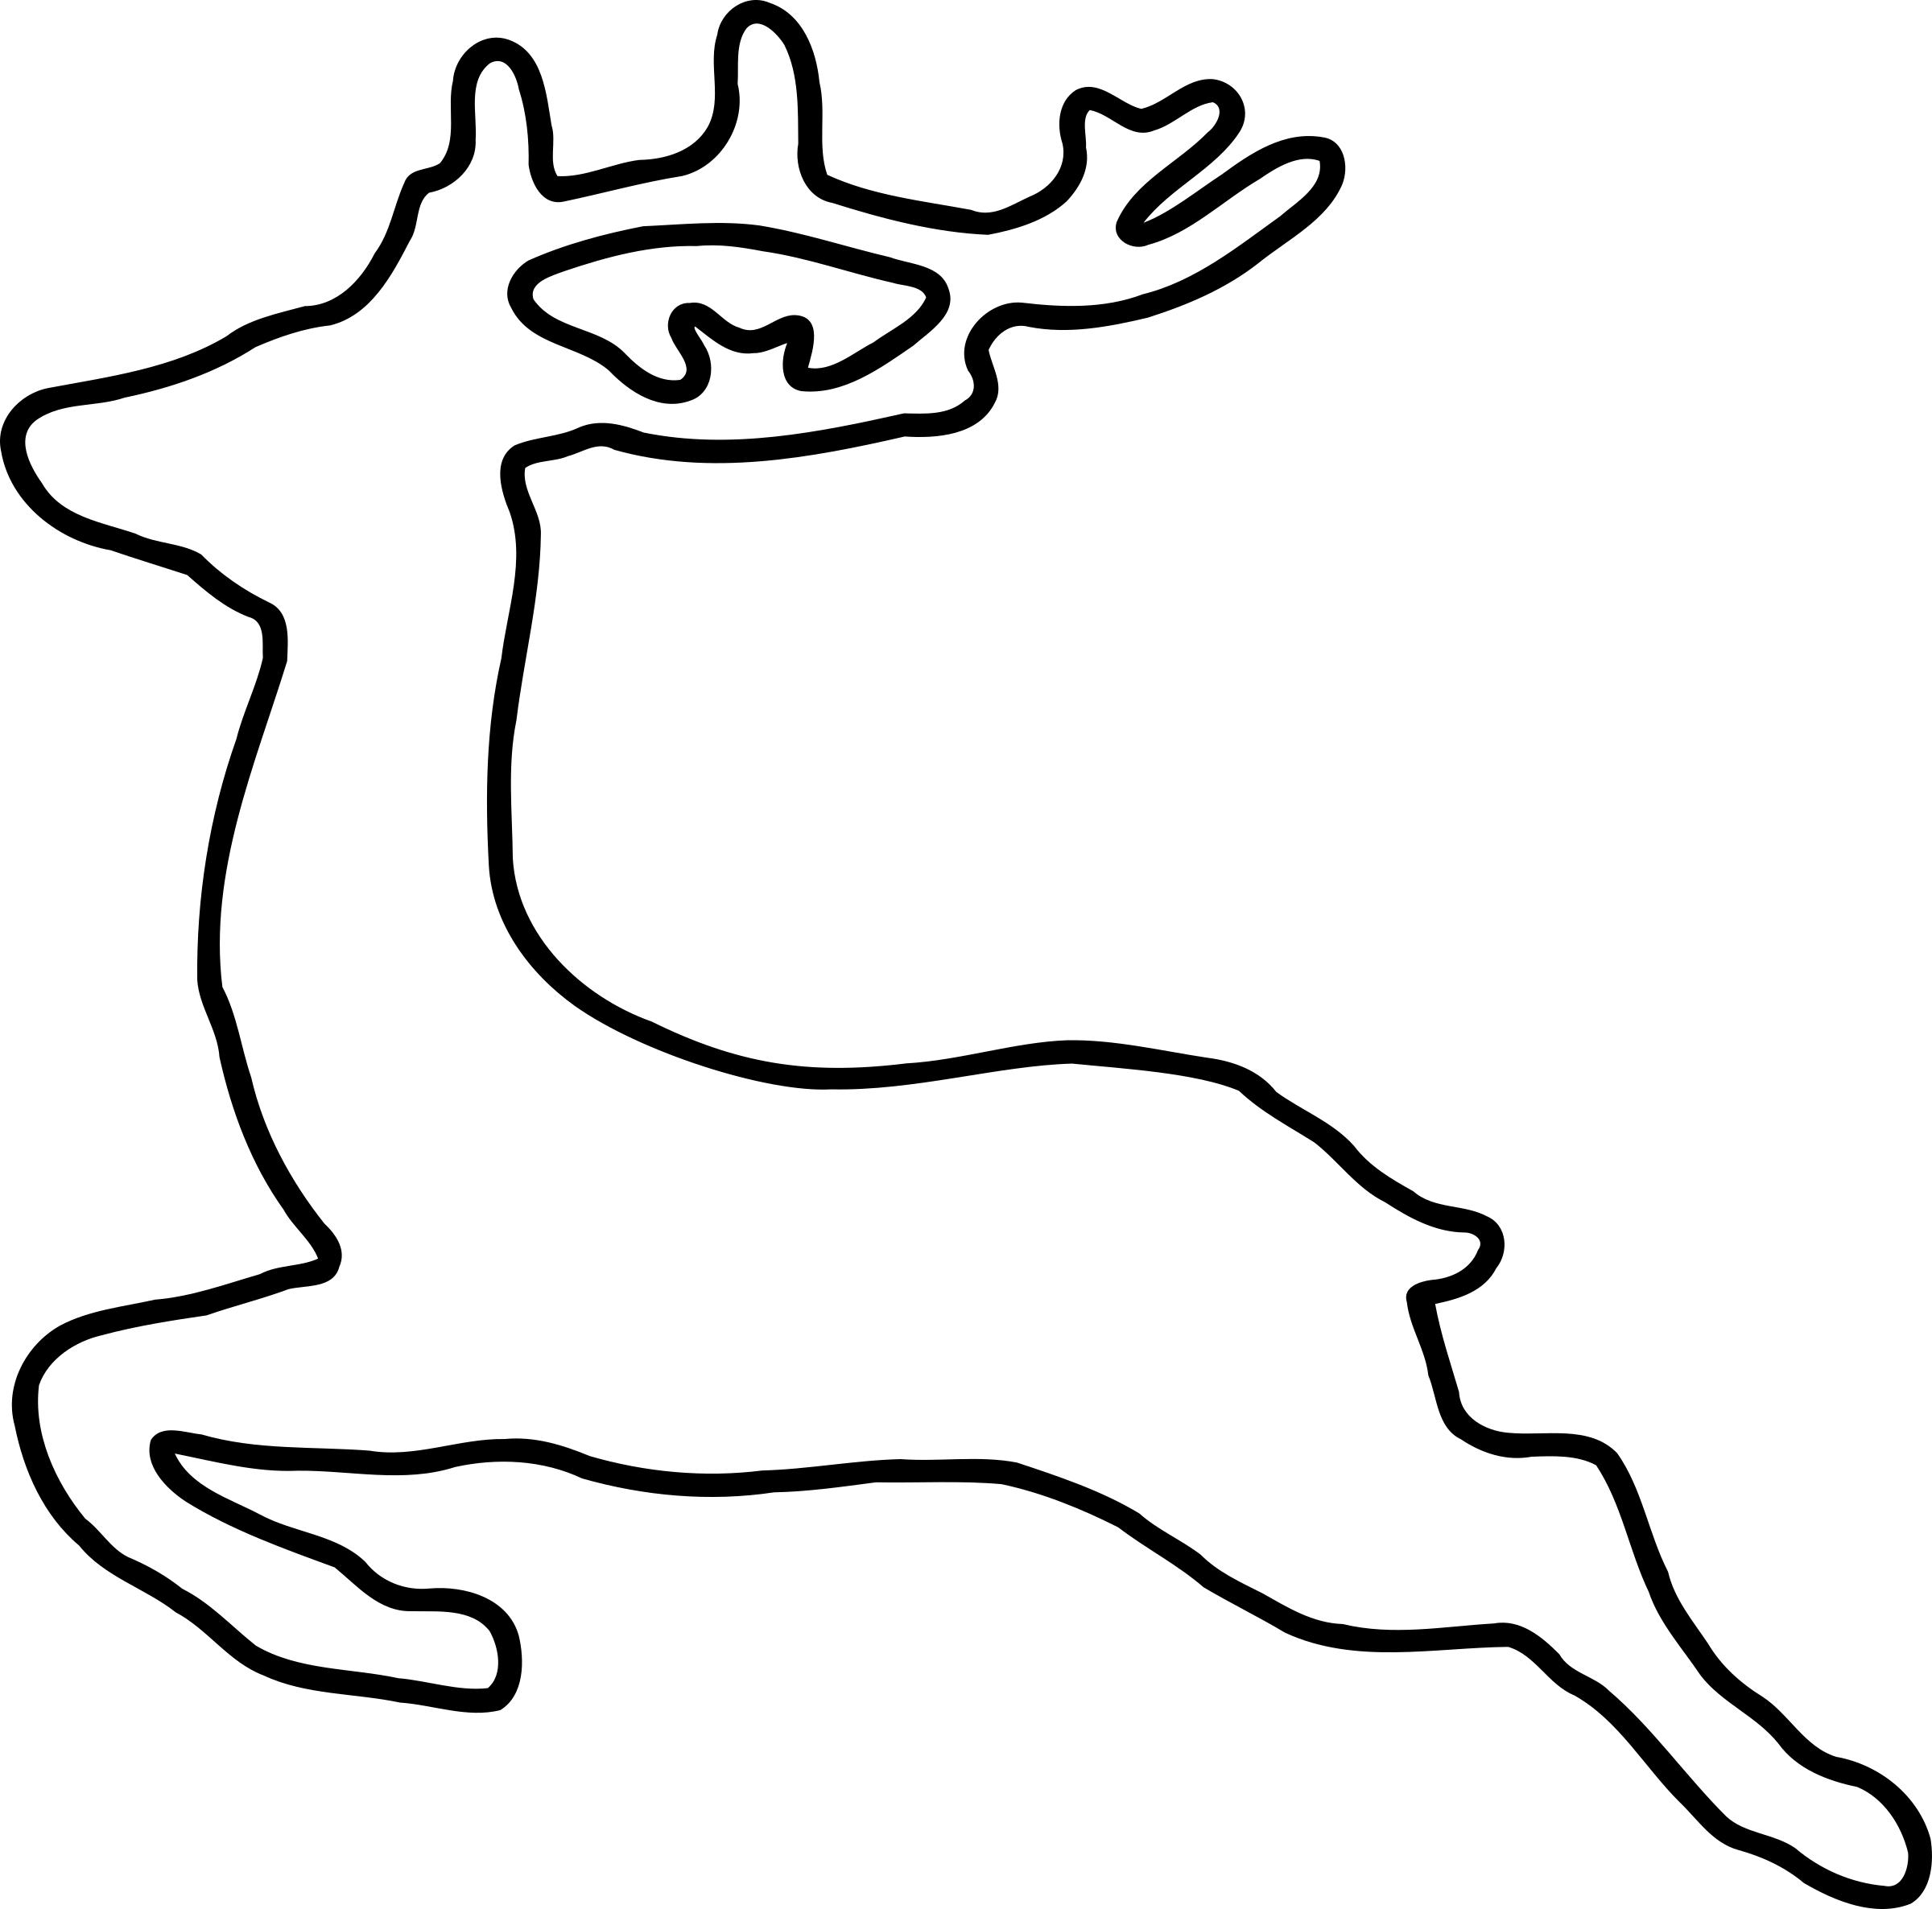 Jumping Deer Silhouette PNG icons